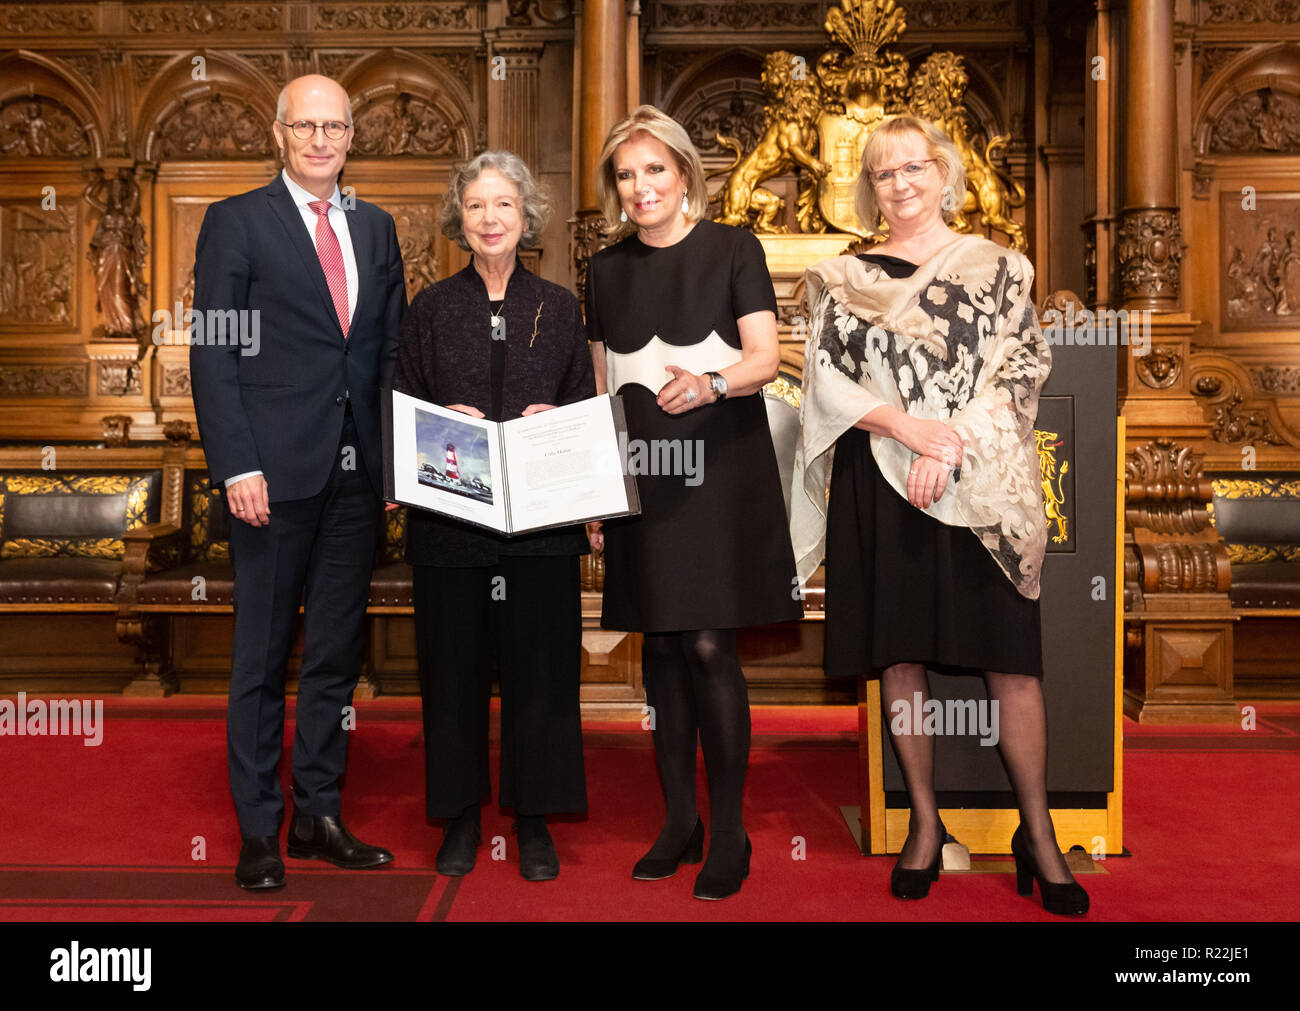 Hamburg, Germany. 16th Nov, 2018. The writer Ulla Hahn (2nd from left)  presents together with Eva-Maria Greve (2nd from right) the Hannelore-Greve  Literature Prize awarded to her at the Hamburg City Hall.